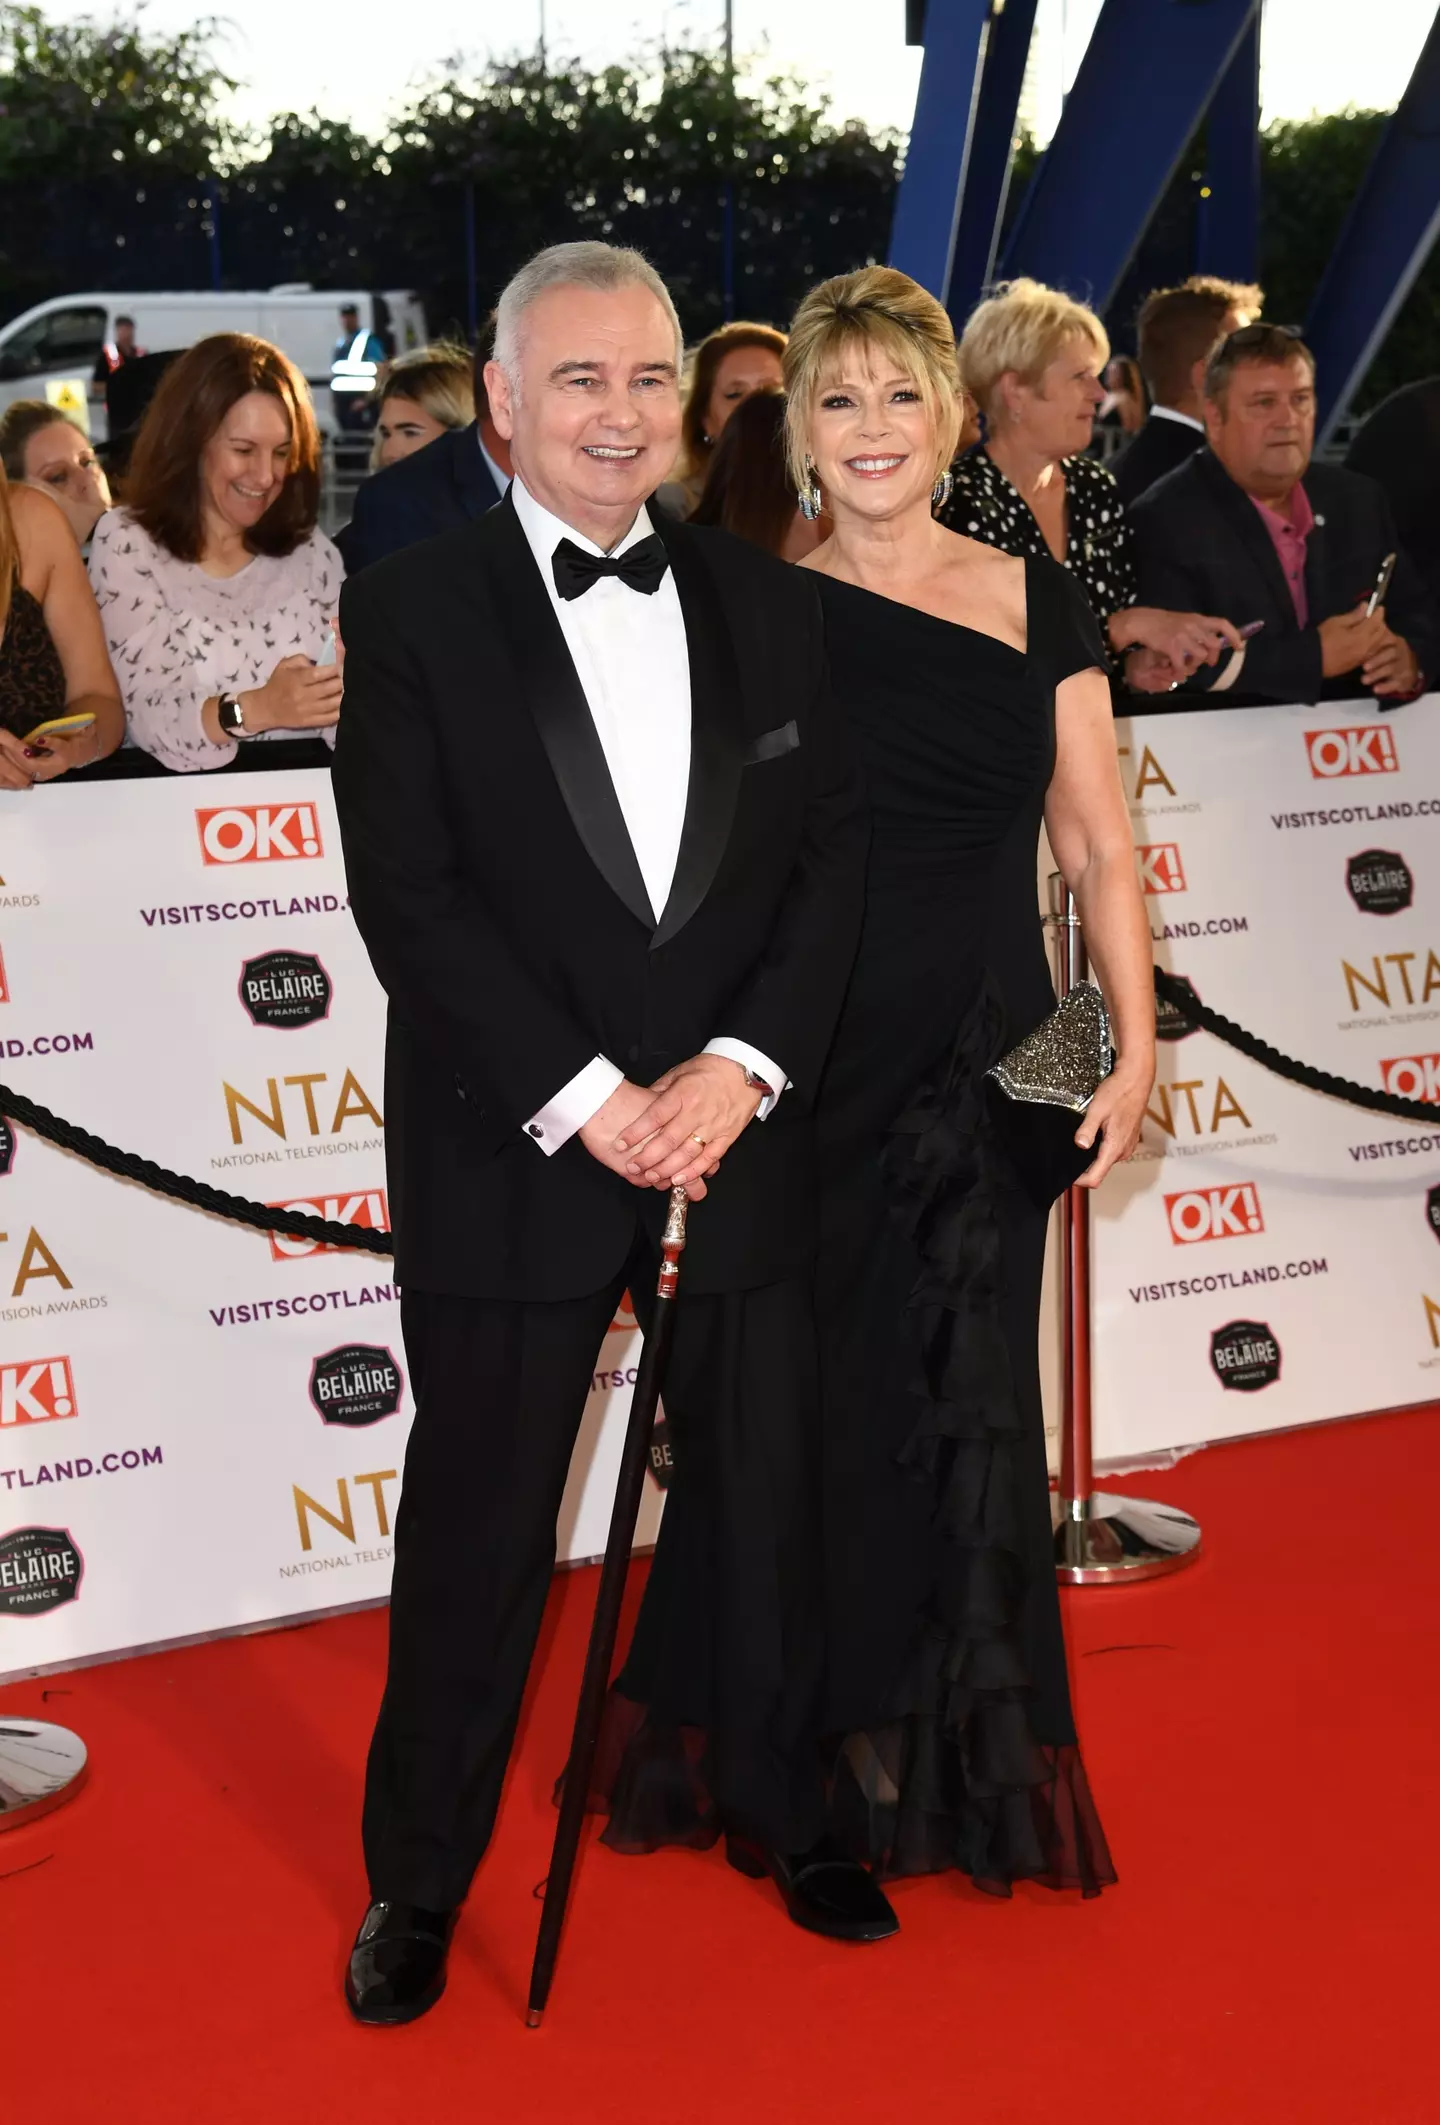 Eamonn and Ruth were a regular fixture together on TV screens. (Gareth Cattermole/Getty Images)